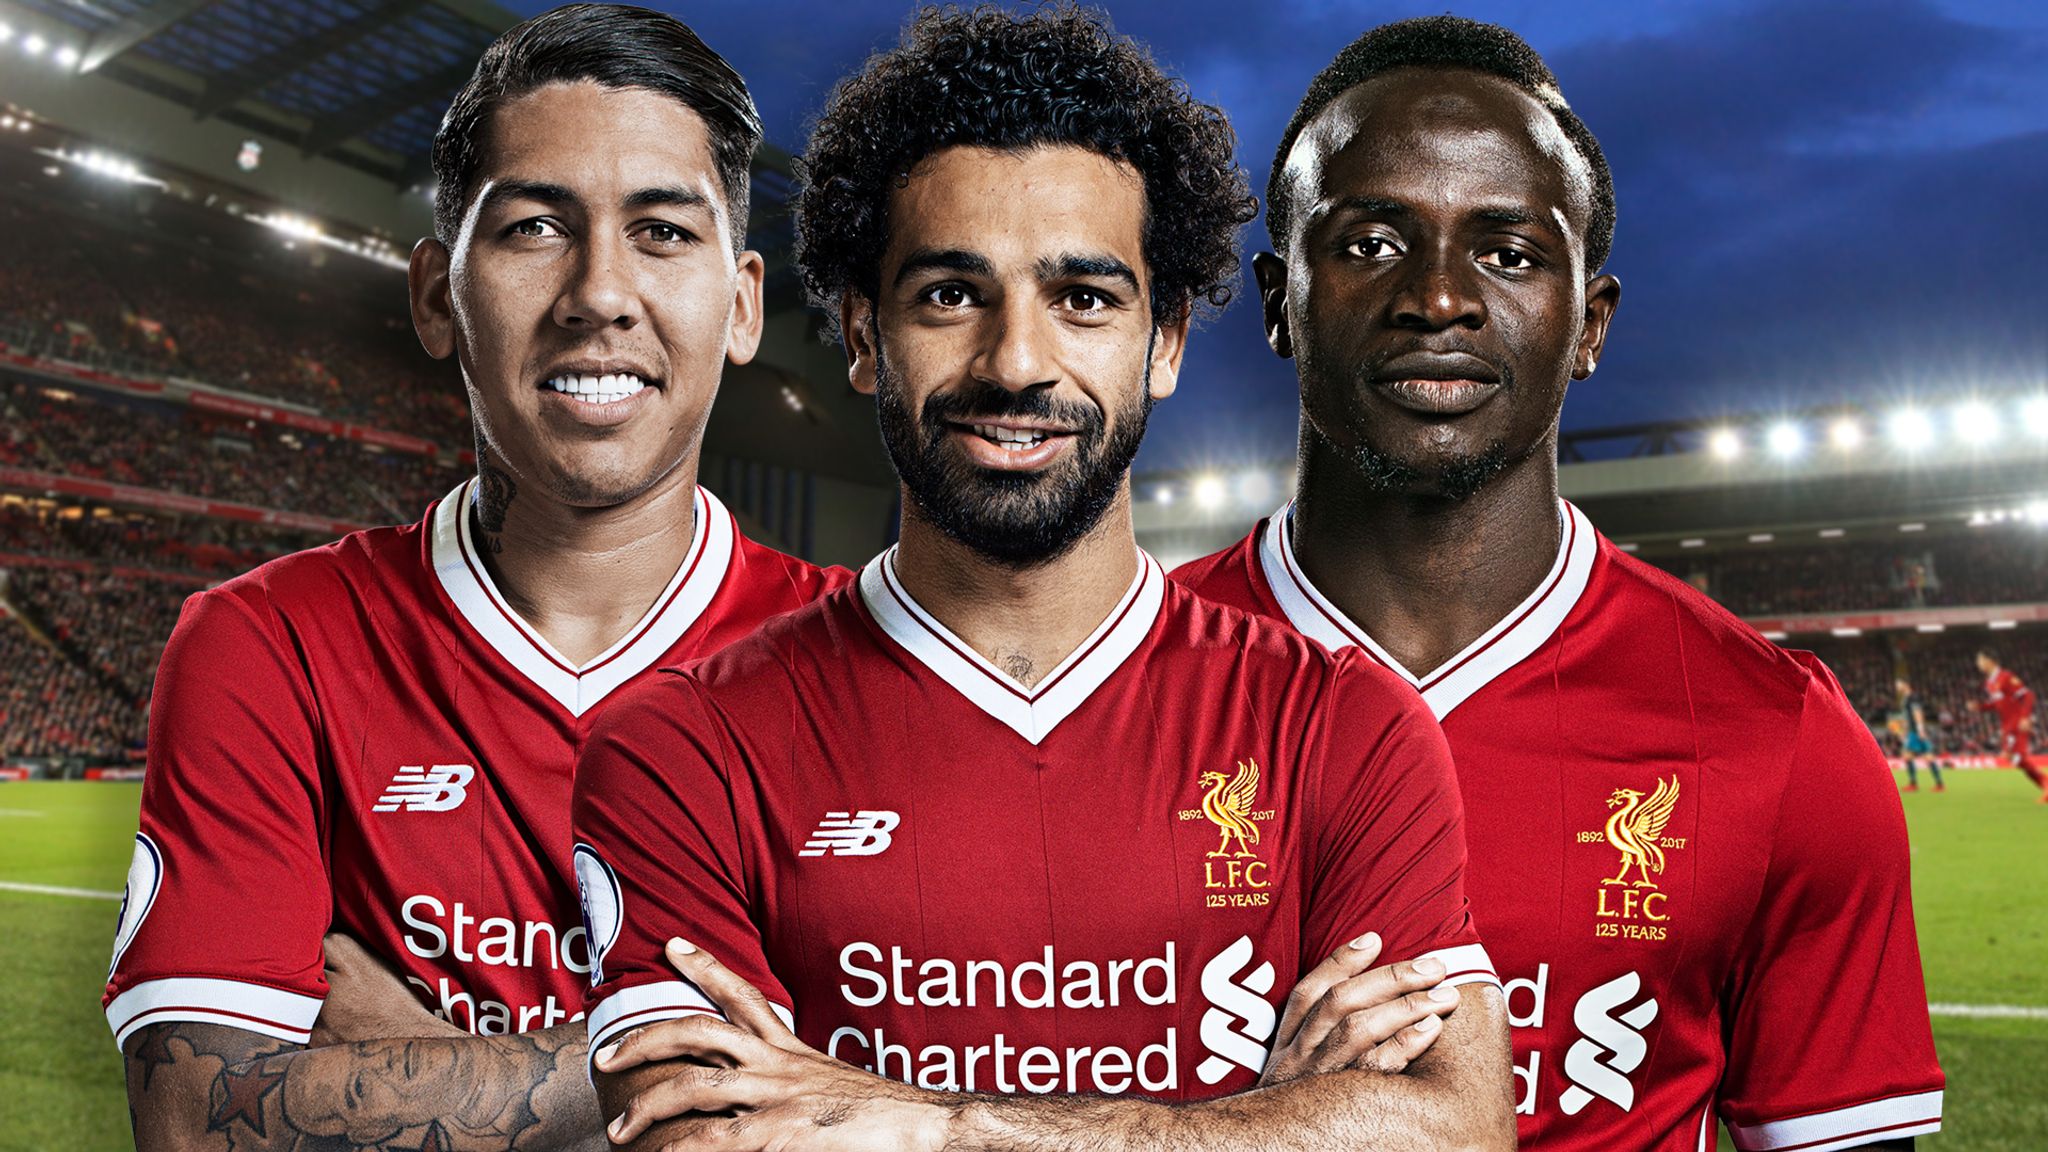  Mohamed Salah, Sadio Mane, and Roberto Firmino are three of Liverpool's best players. They are all very talented and have helped Liverpool win many trophies.